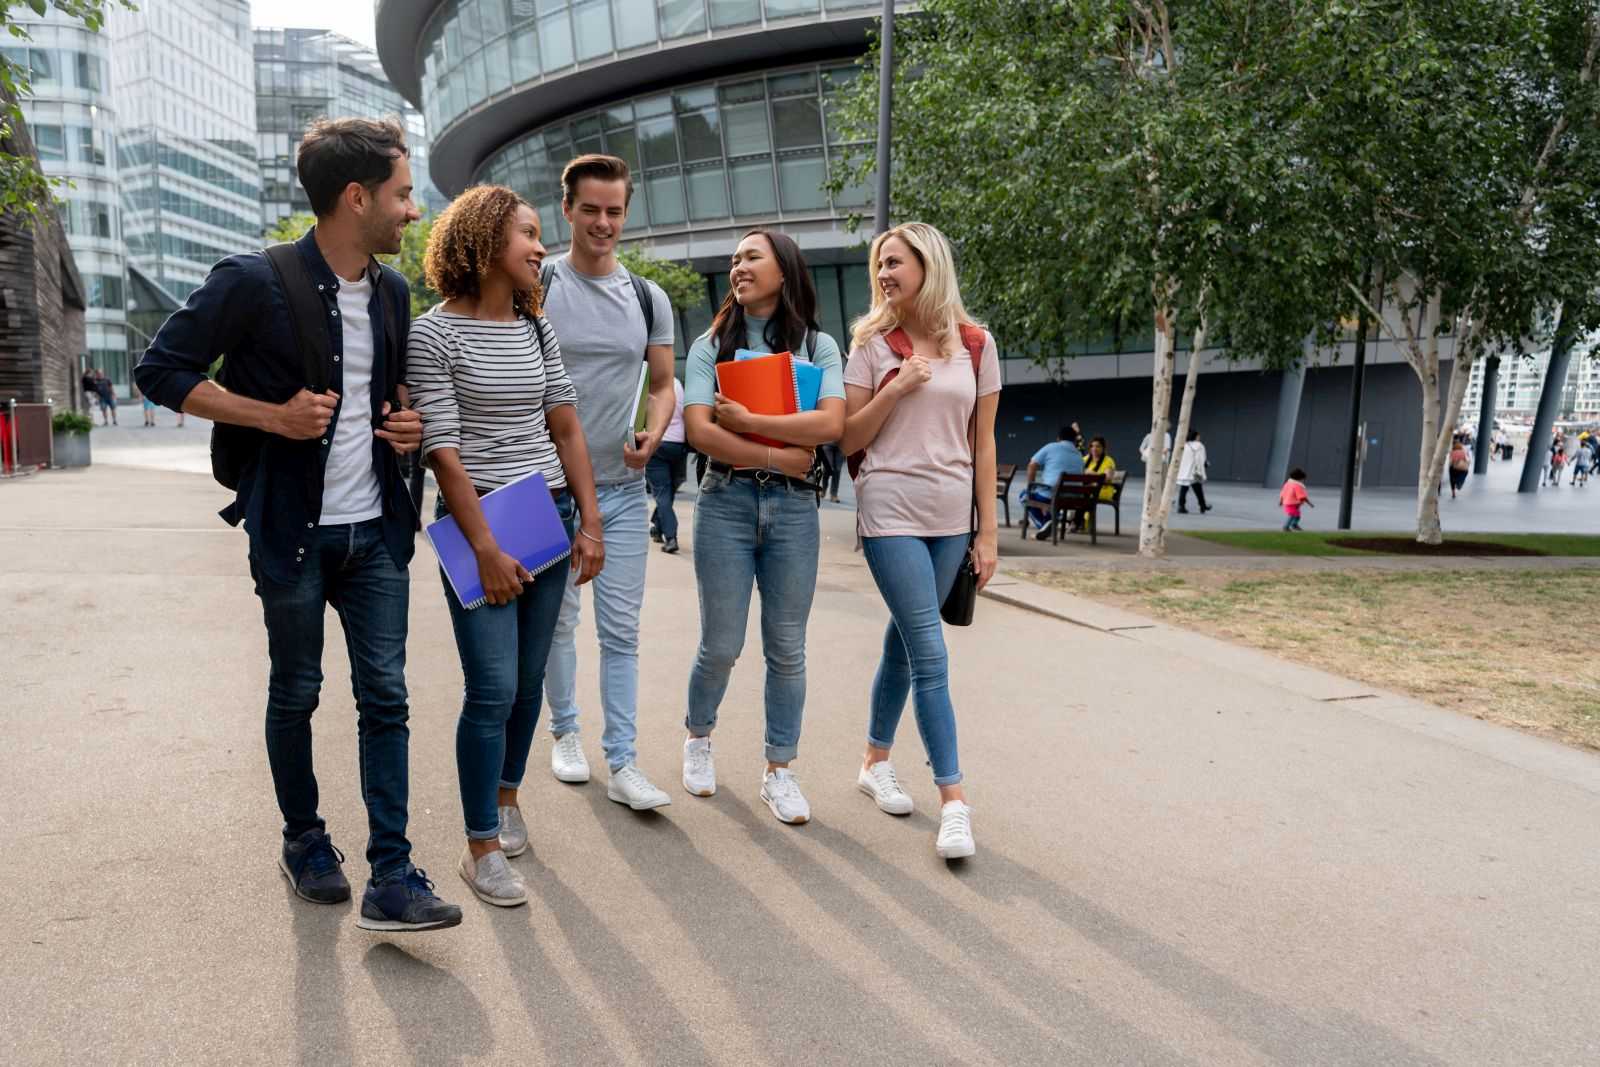 Diverse group of students walking along a London street